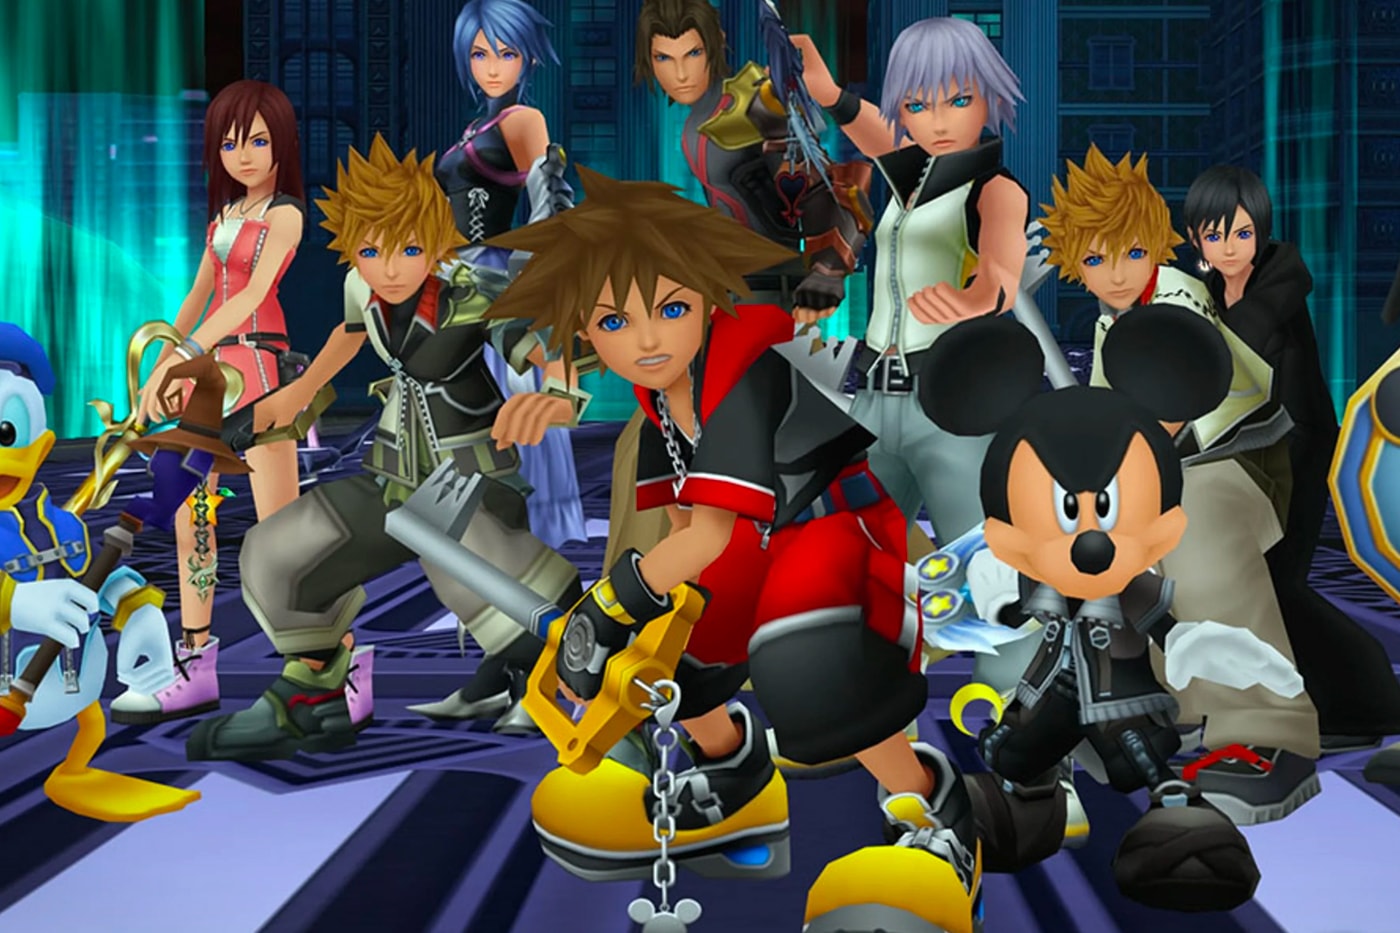 Nintendo Life - Everyone is here! Did you get the Sora